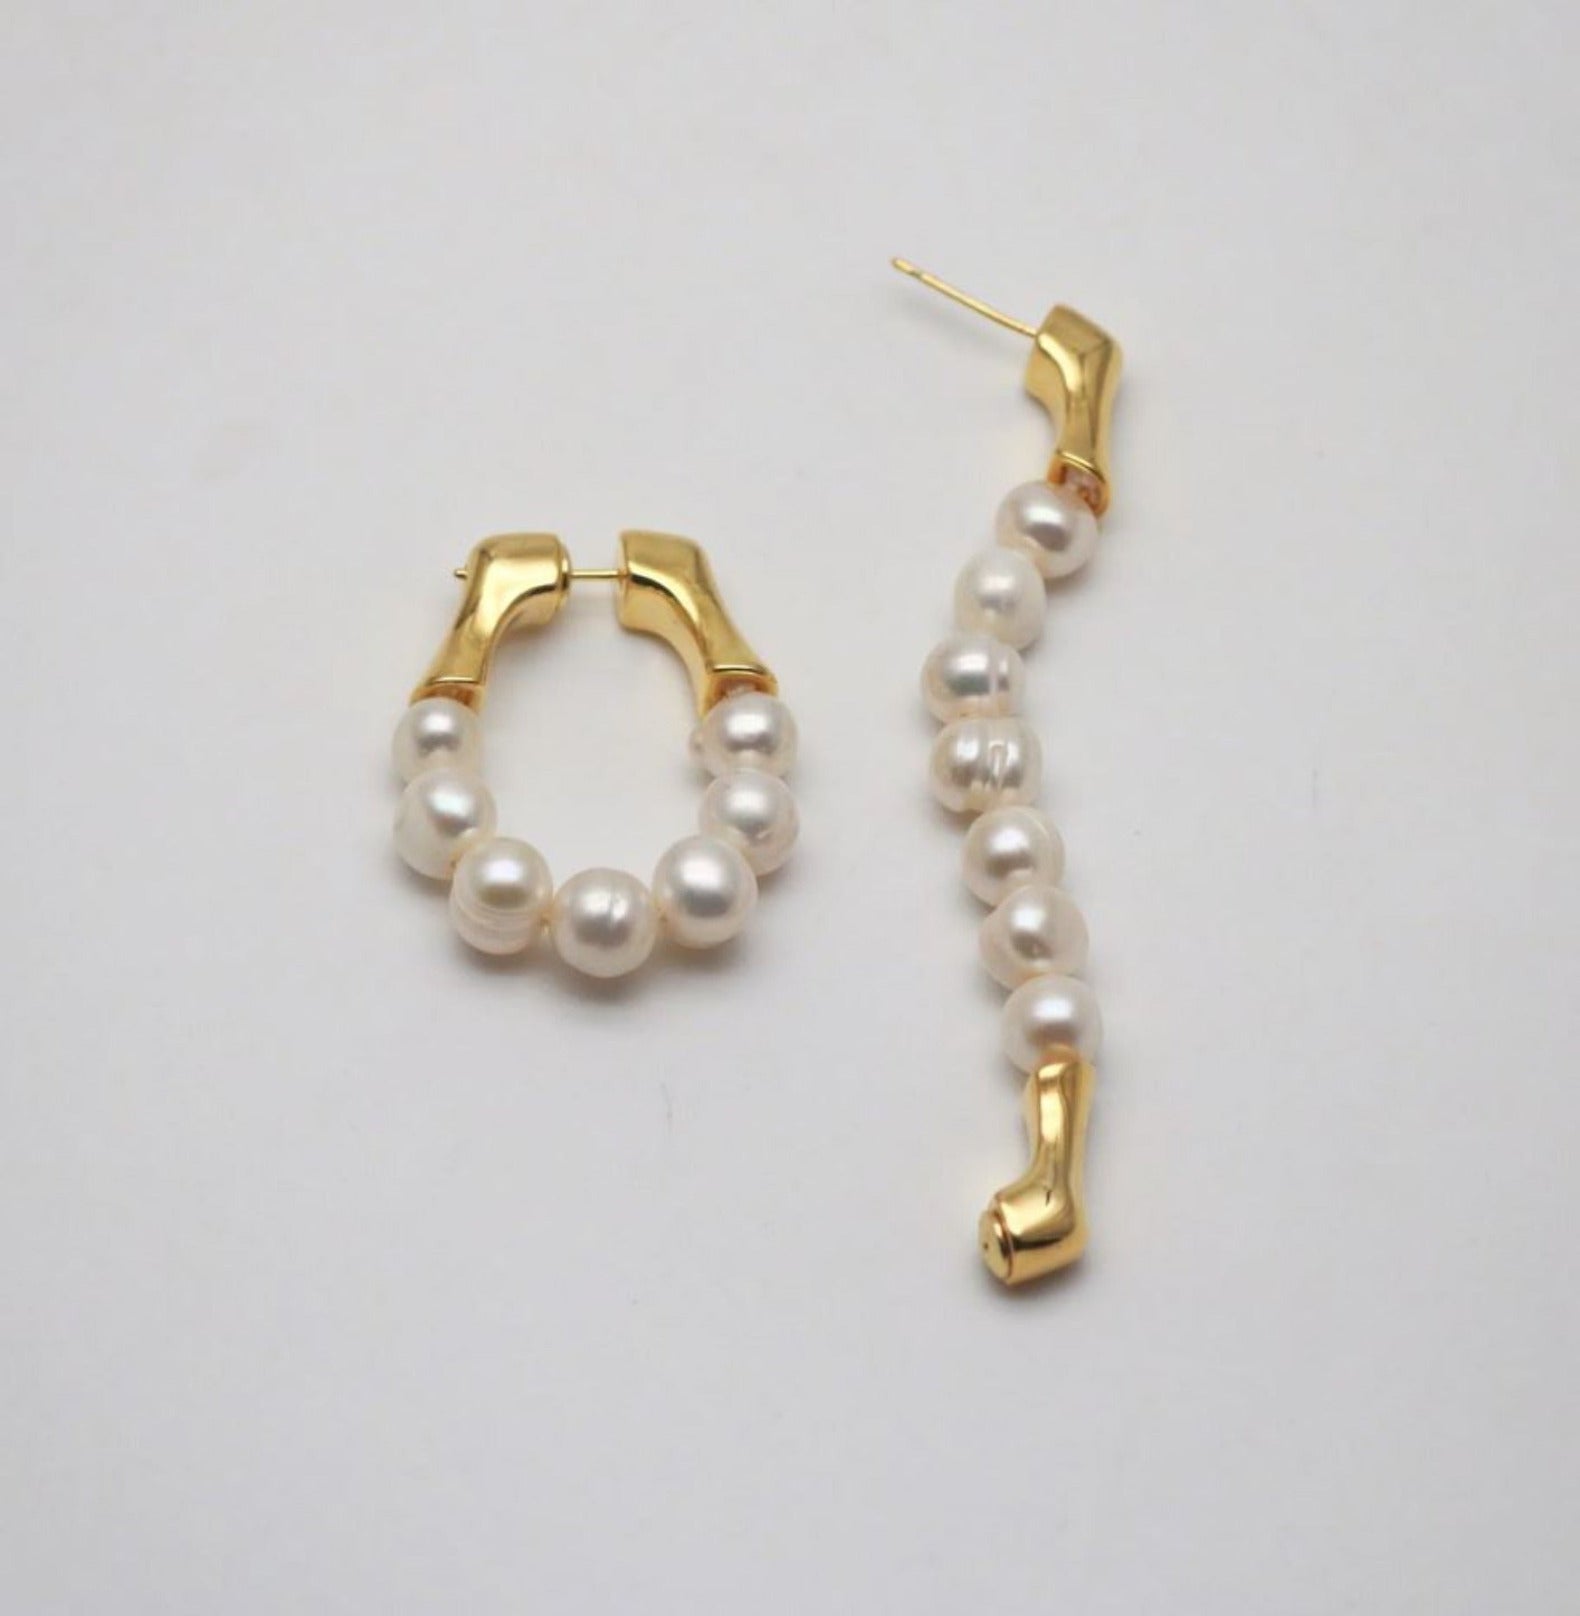 ETERNITY PEARL EARRINGS ring Yubama Jewelry Online Store - The Elegant Designs of Gold and Silver ! 